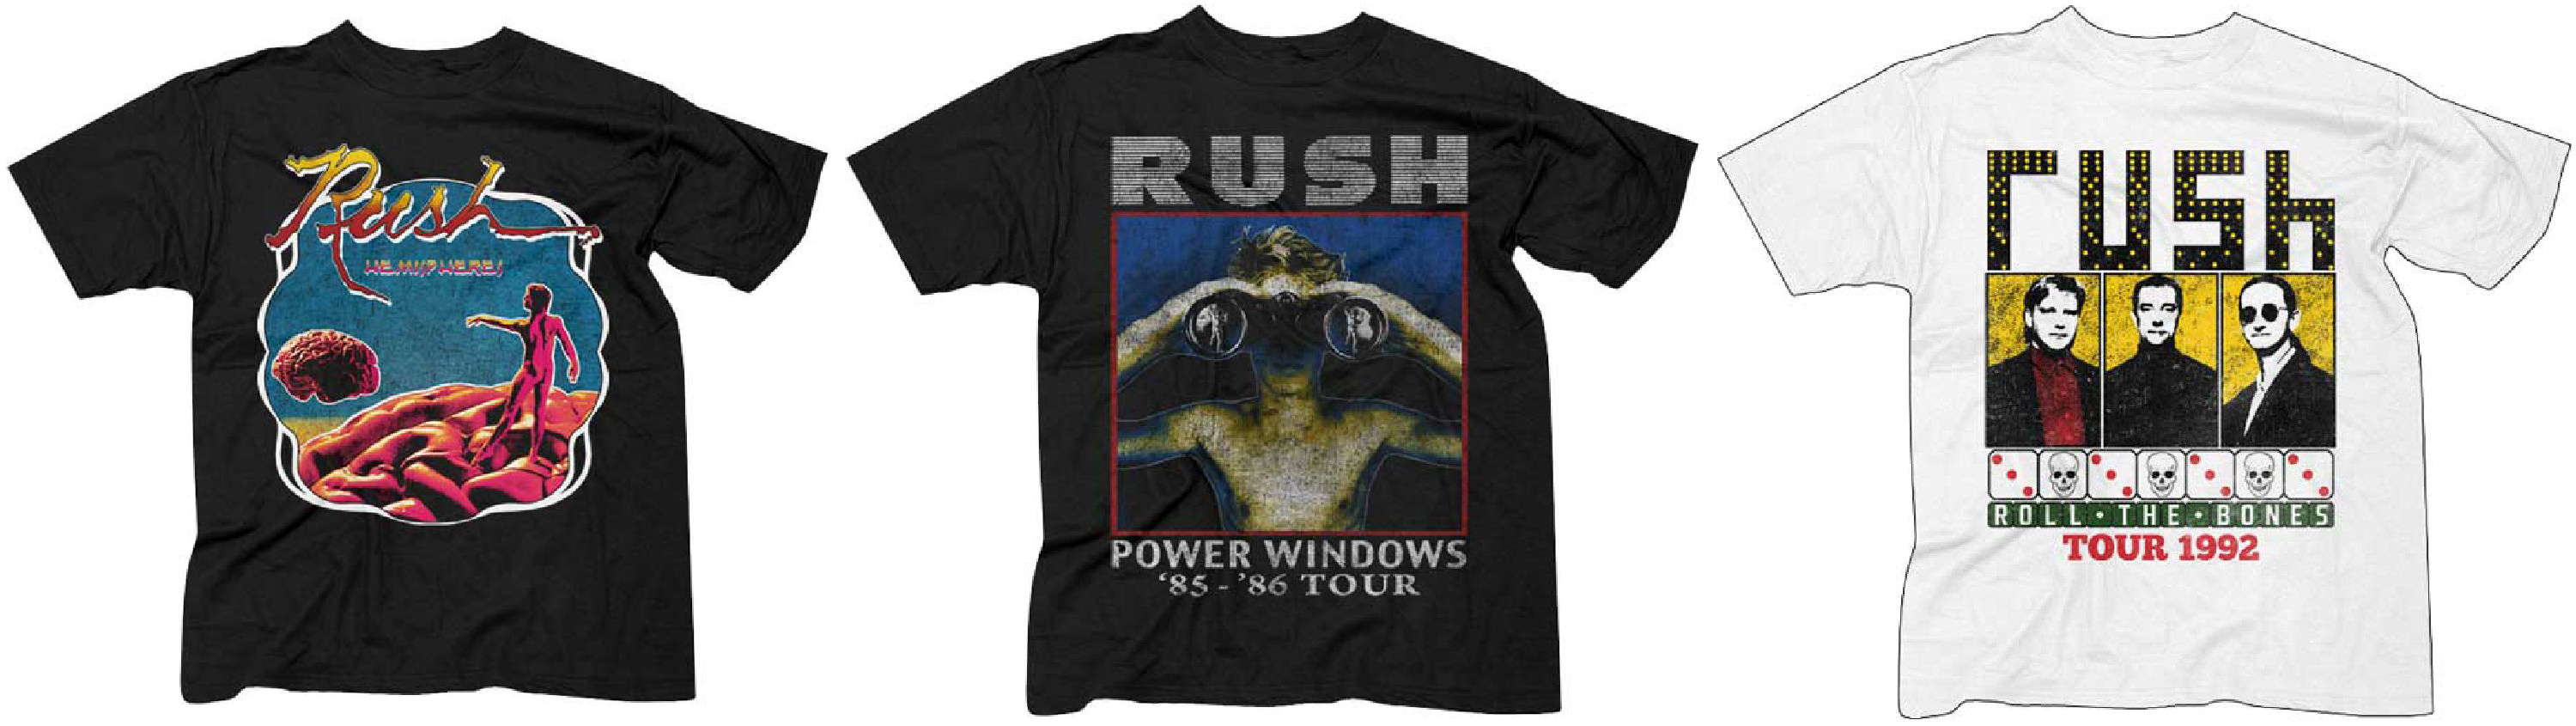 New Rush t-shirts featuring classic album cover artwork and tour designs are now available, including Hemispheres, Power Windows, and Roll the Bones